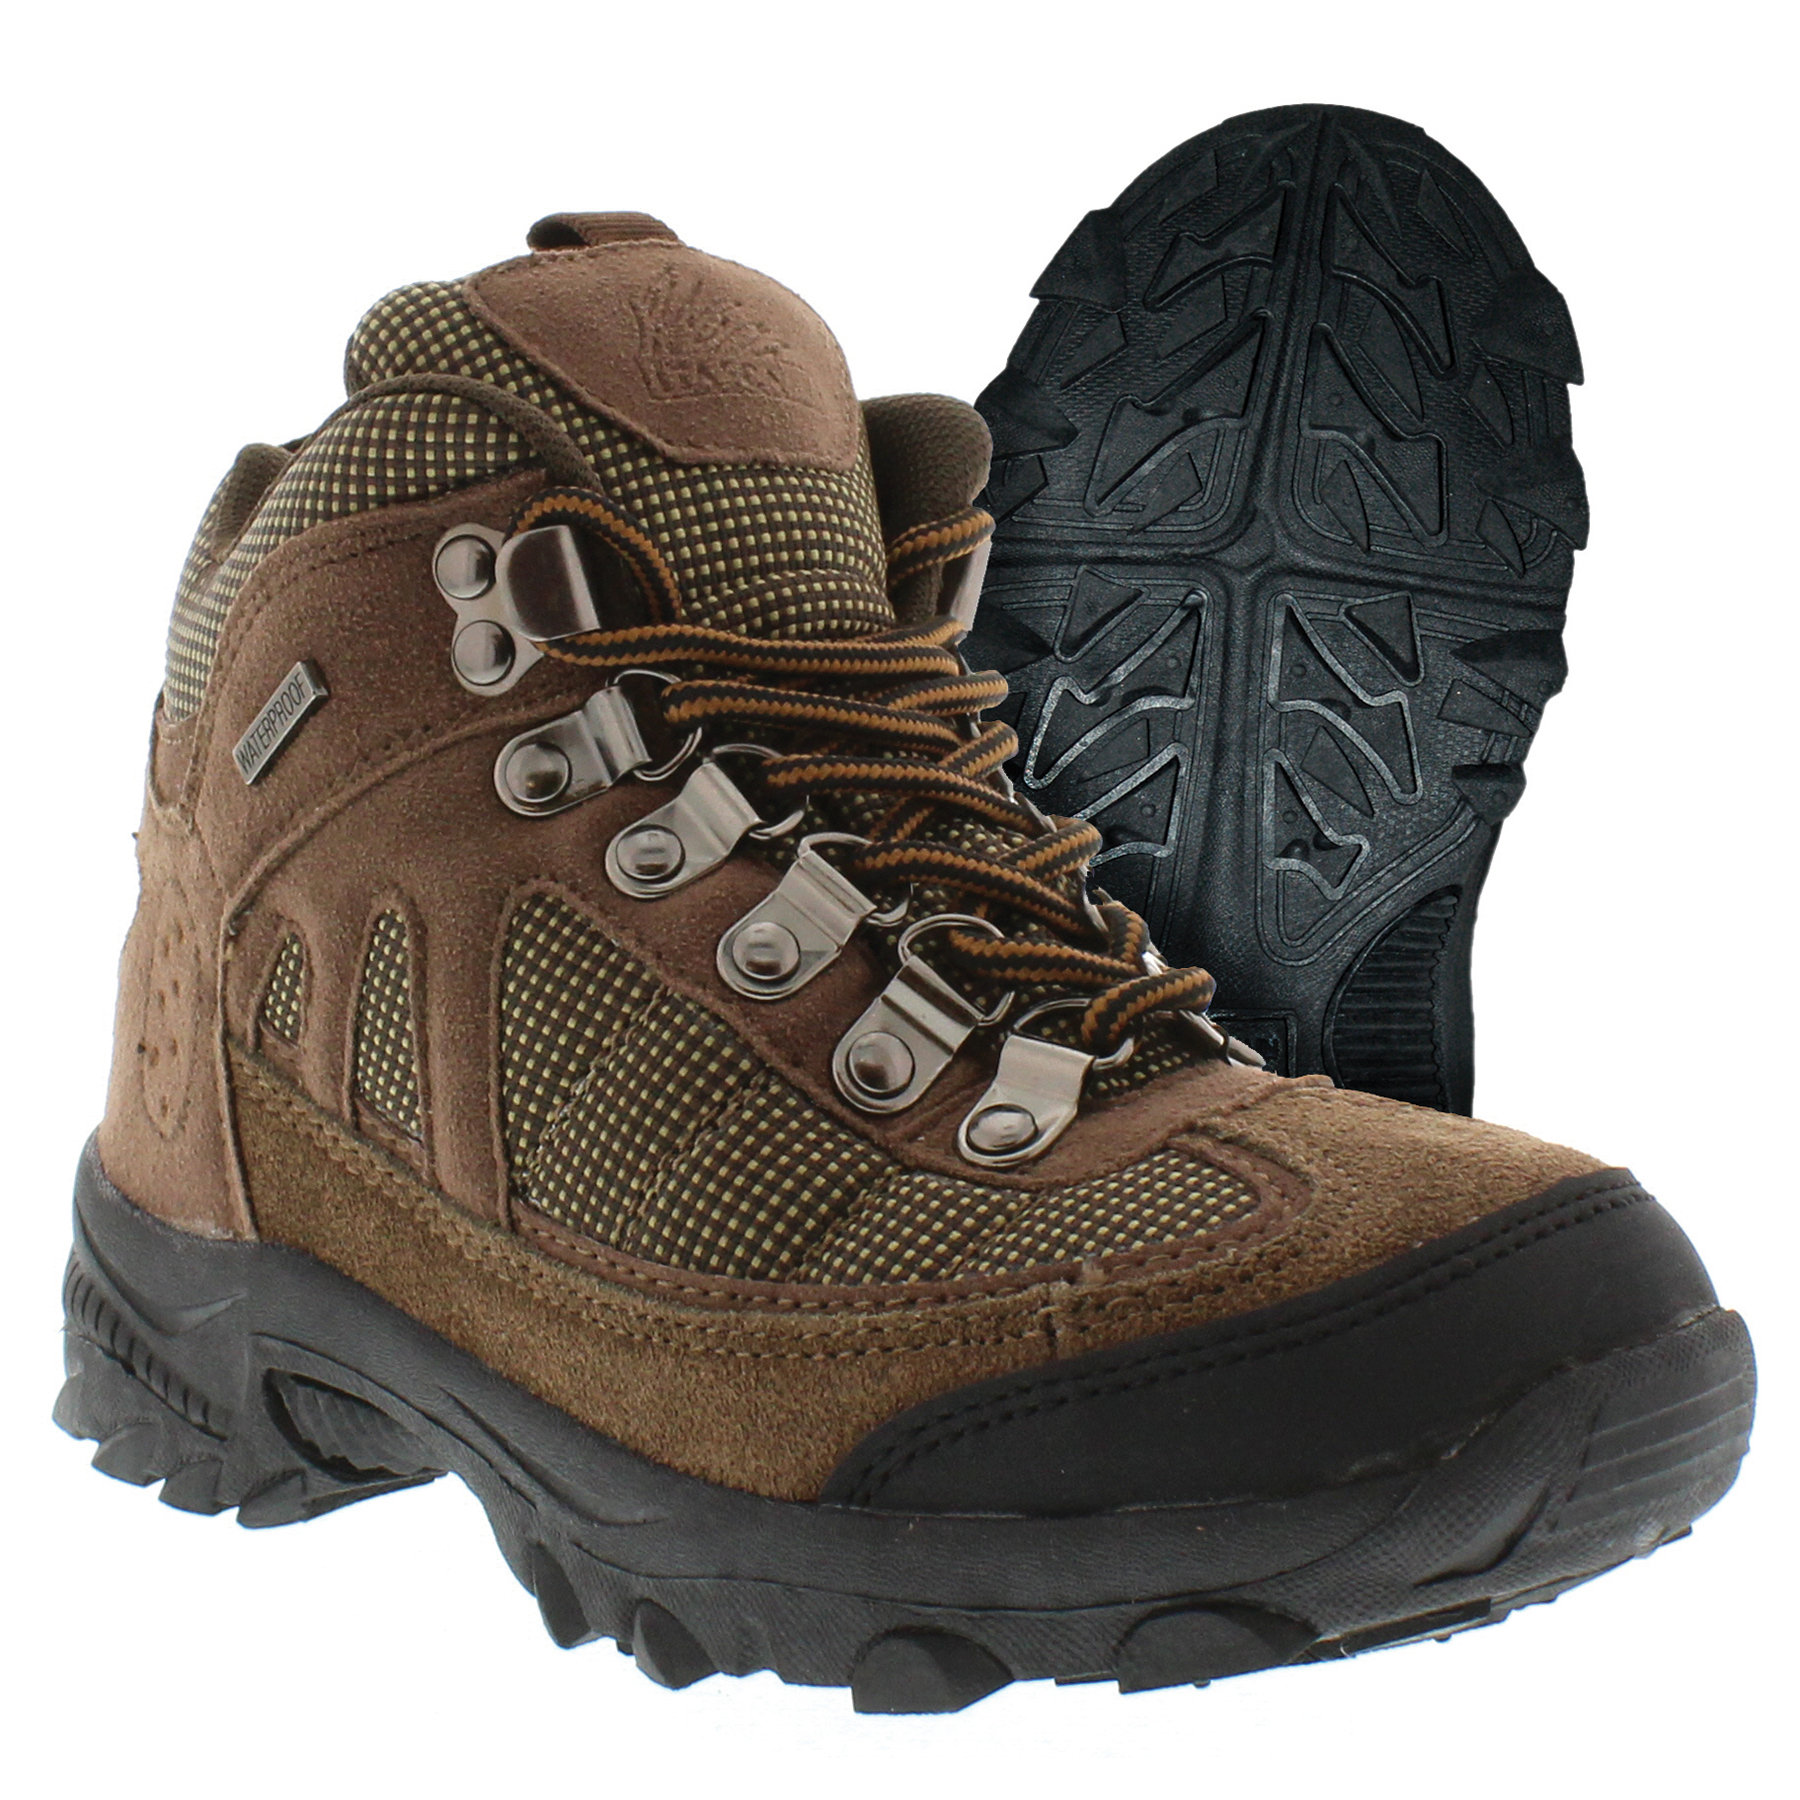 Lincoln Outfitters Kid's Sentinel Waterproof Hiker Boots Brown - 4506815